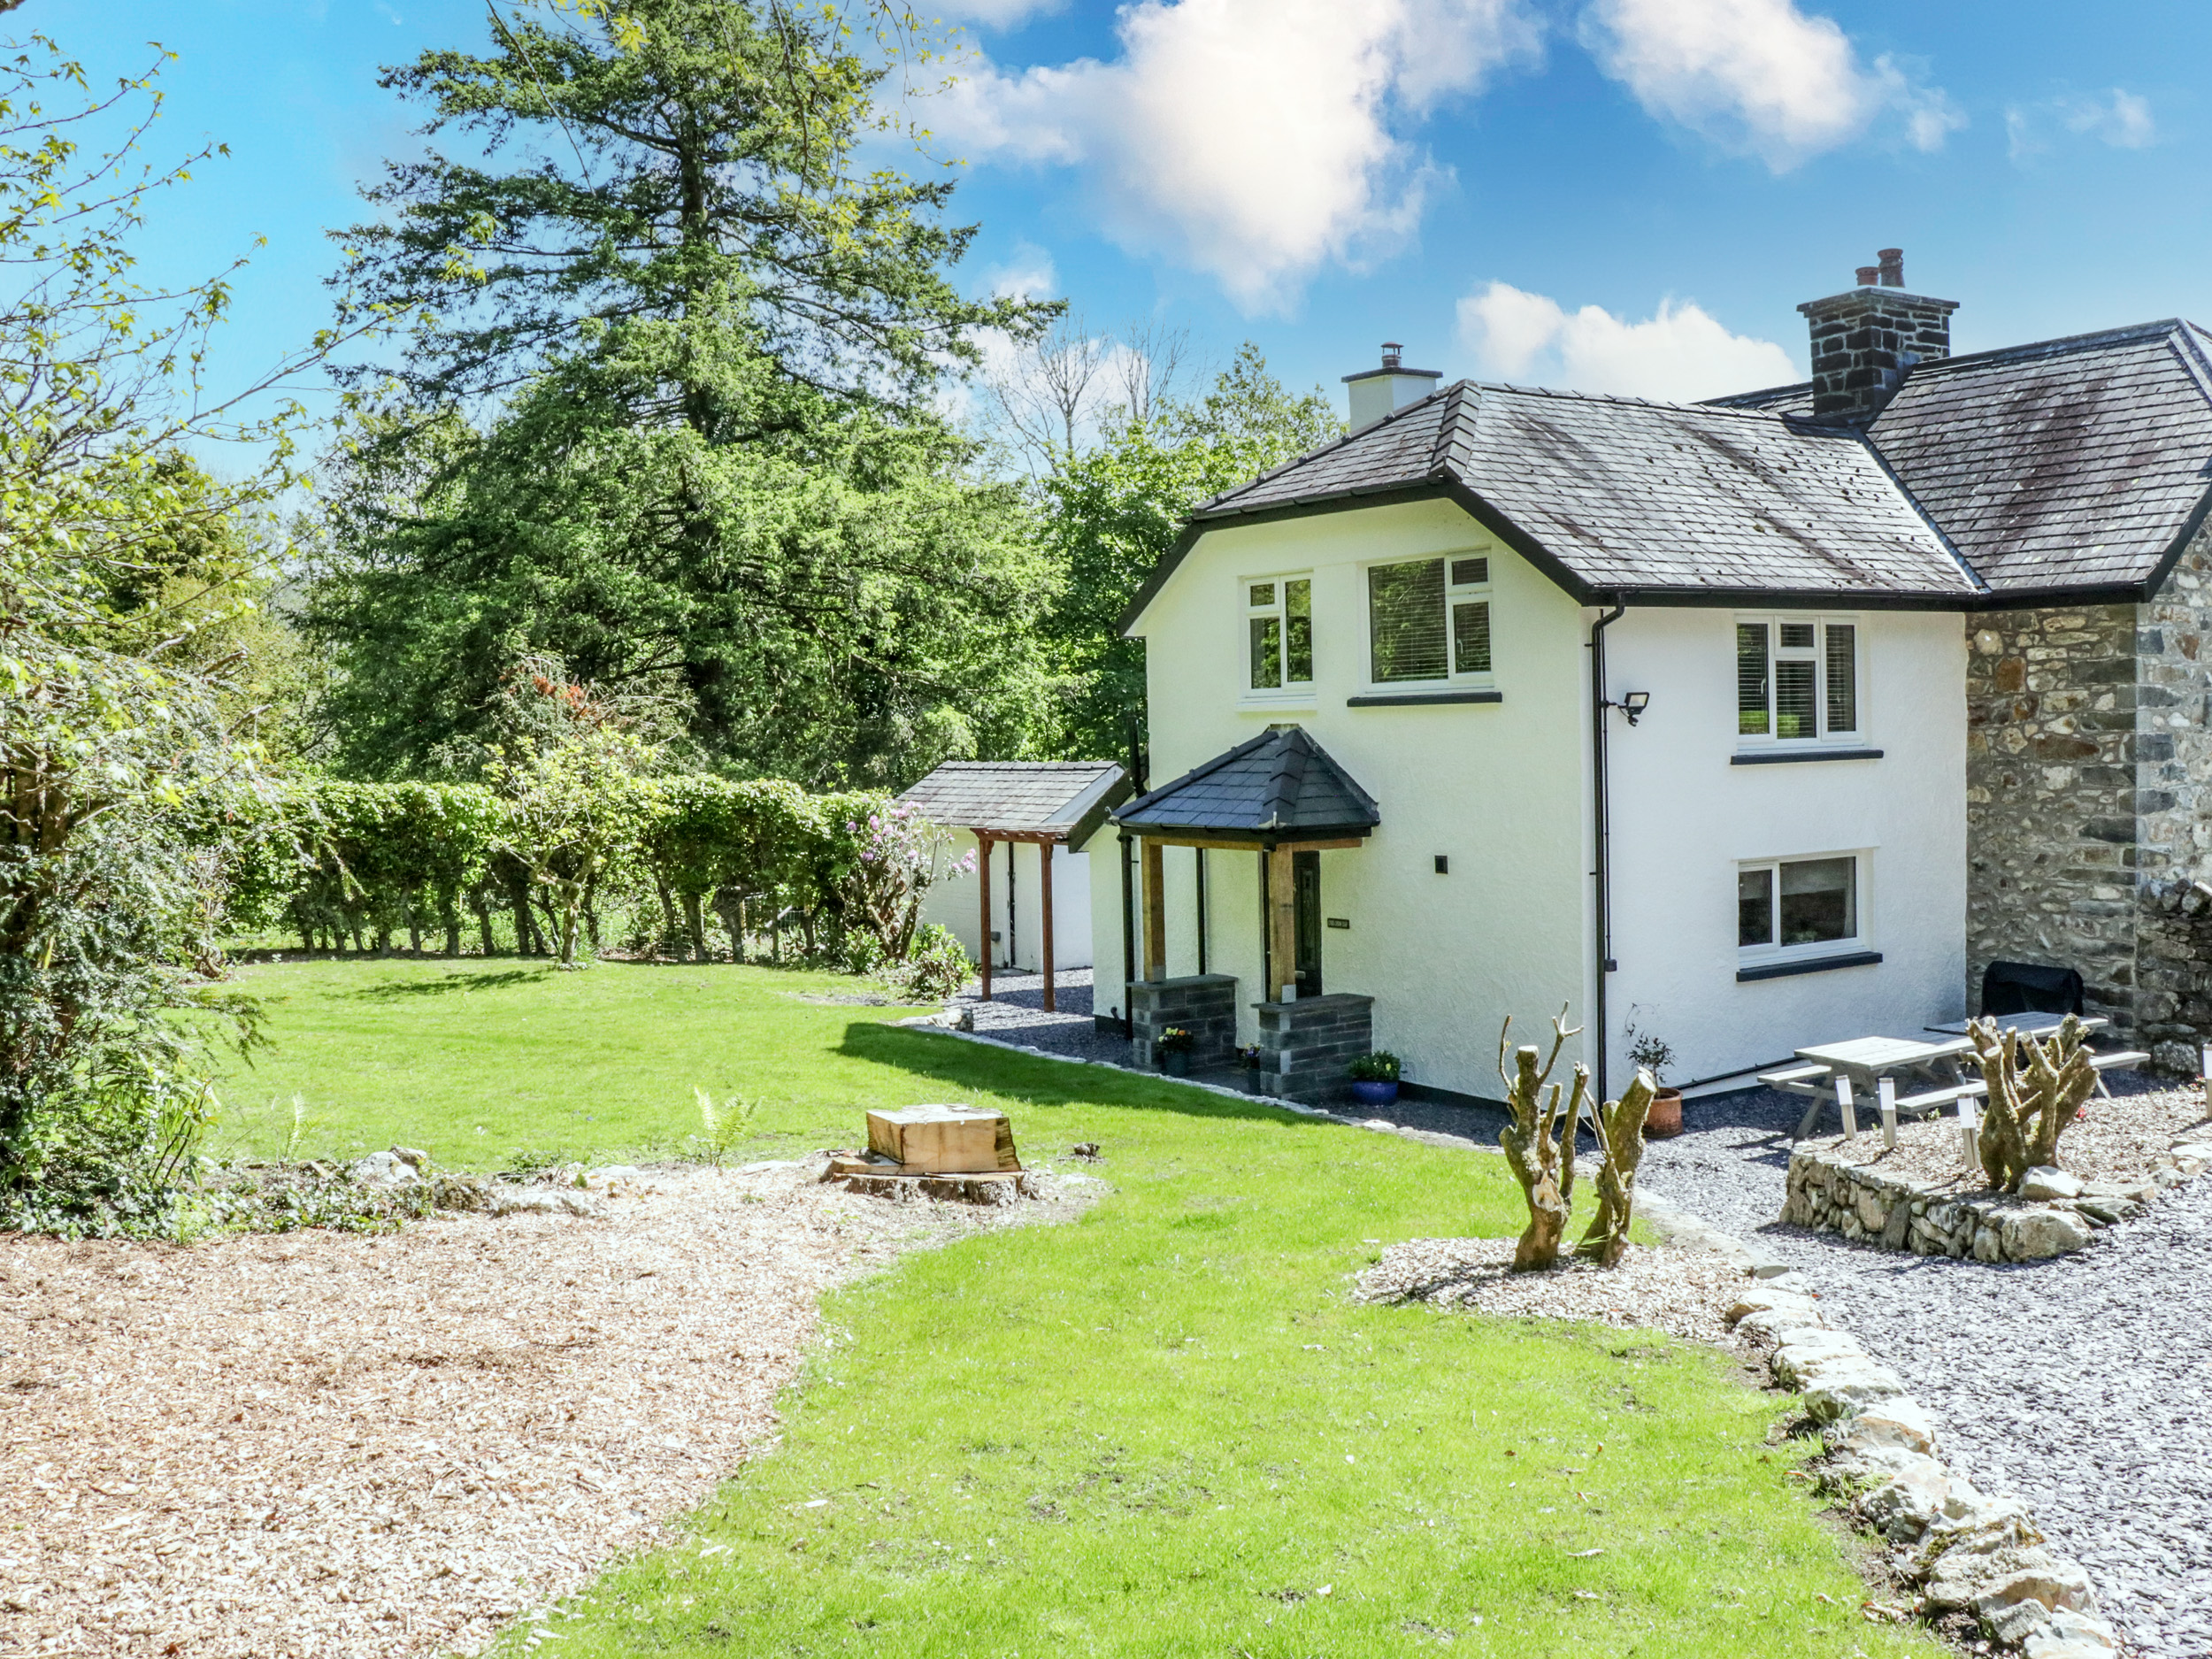 4 bedroom Cottage for rent in Betws-y-Coed